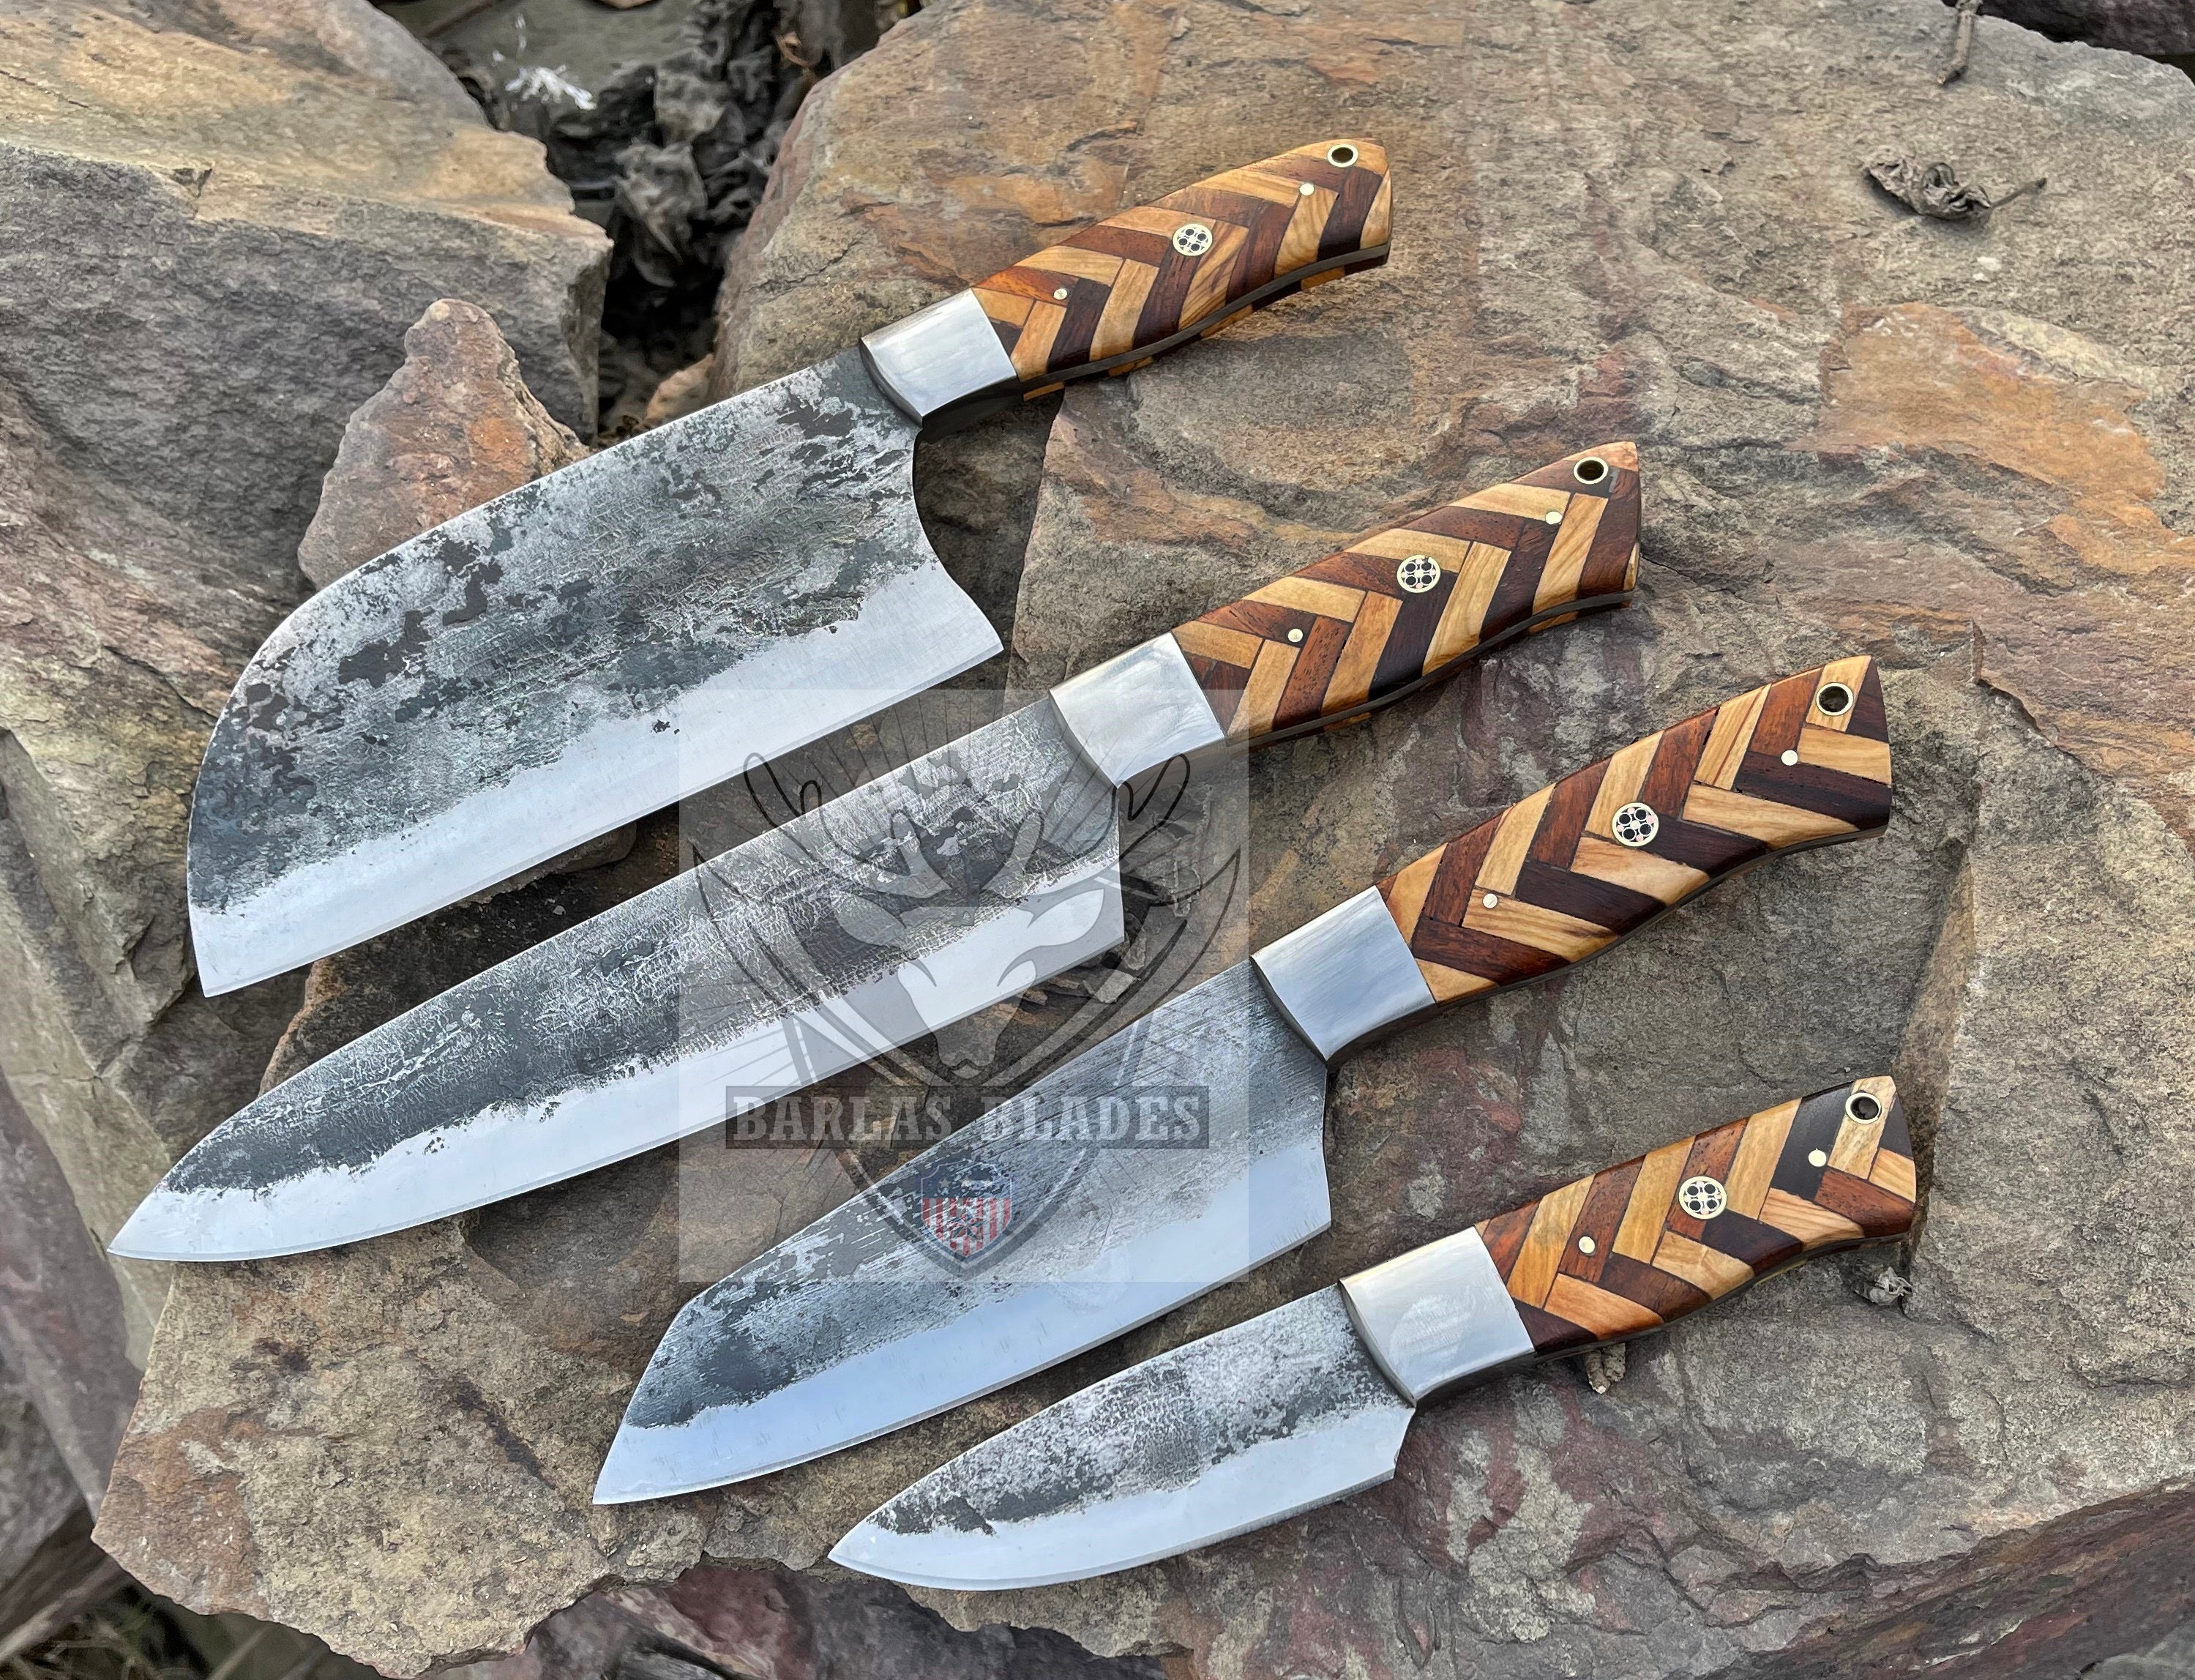 Damascus Knife 4 Piece Gift Set – Prince of Scots